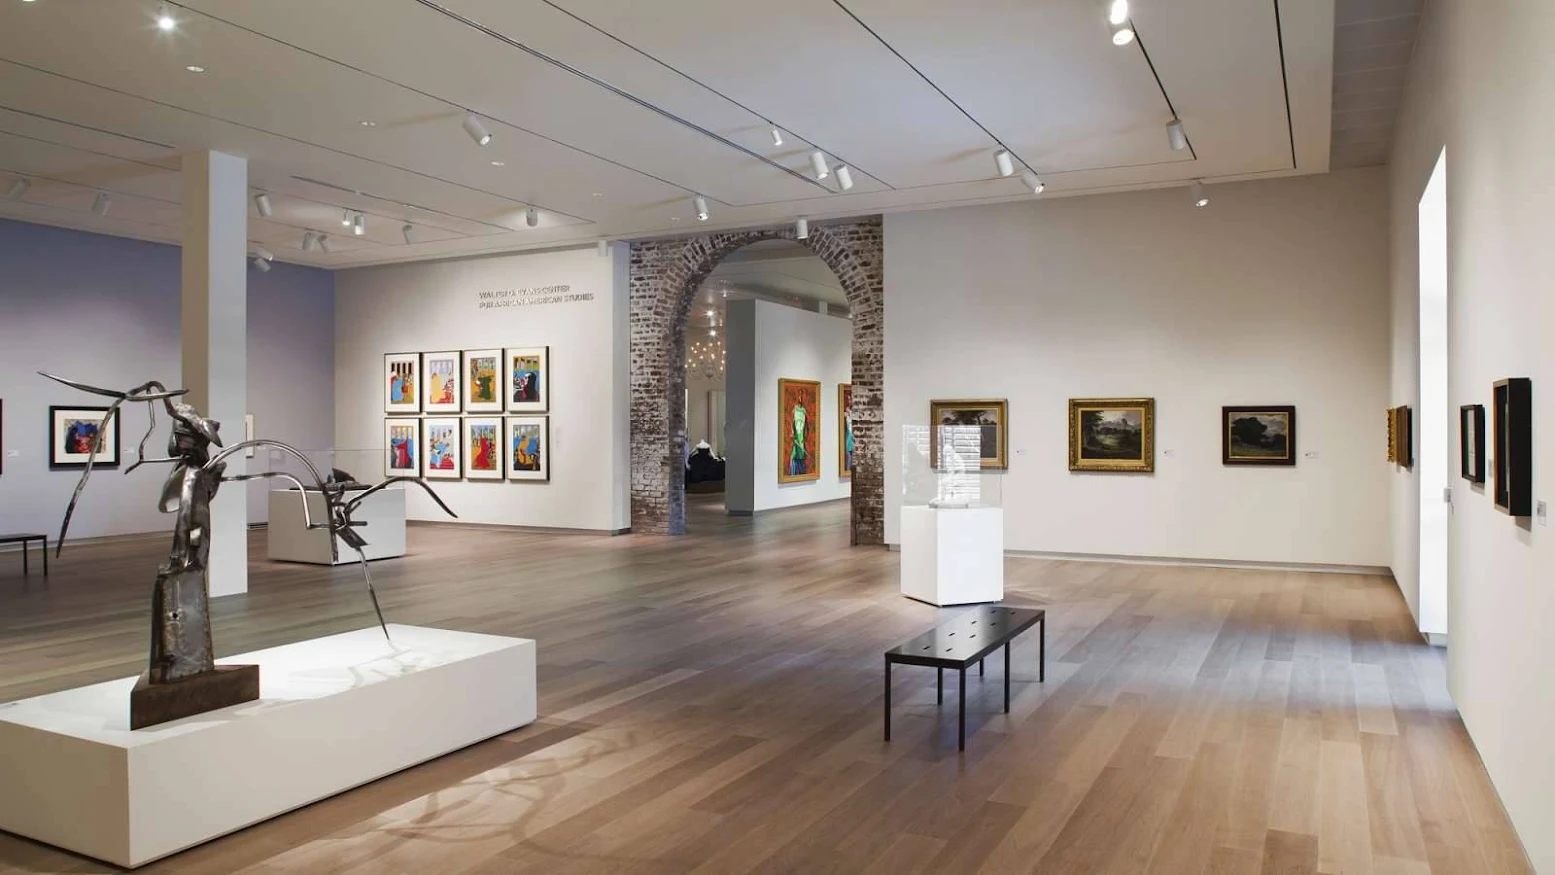 SCAD Museum of Art receives Honor Award 2014